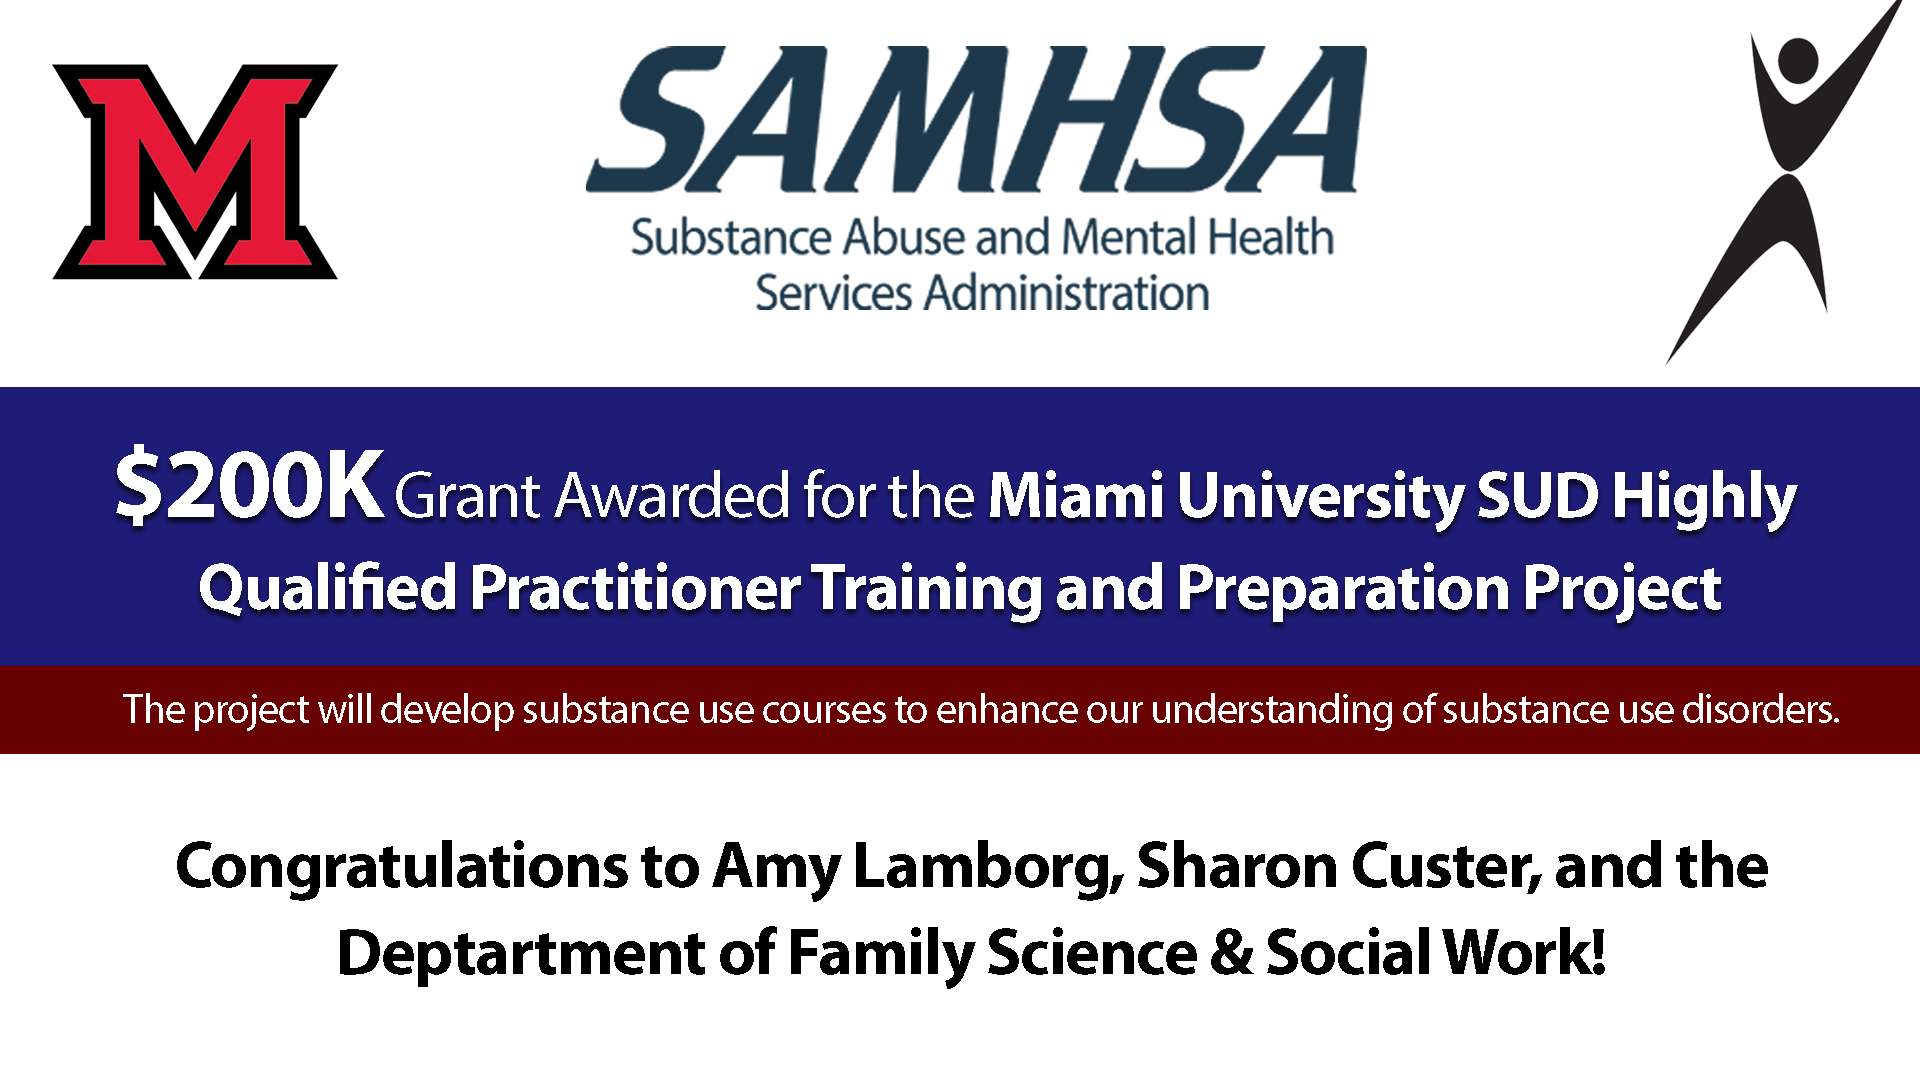 $200 Grant Awarded for the Miami University SUD Highly Qualified Practitioner Training and Preparation Project